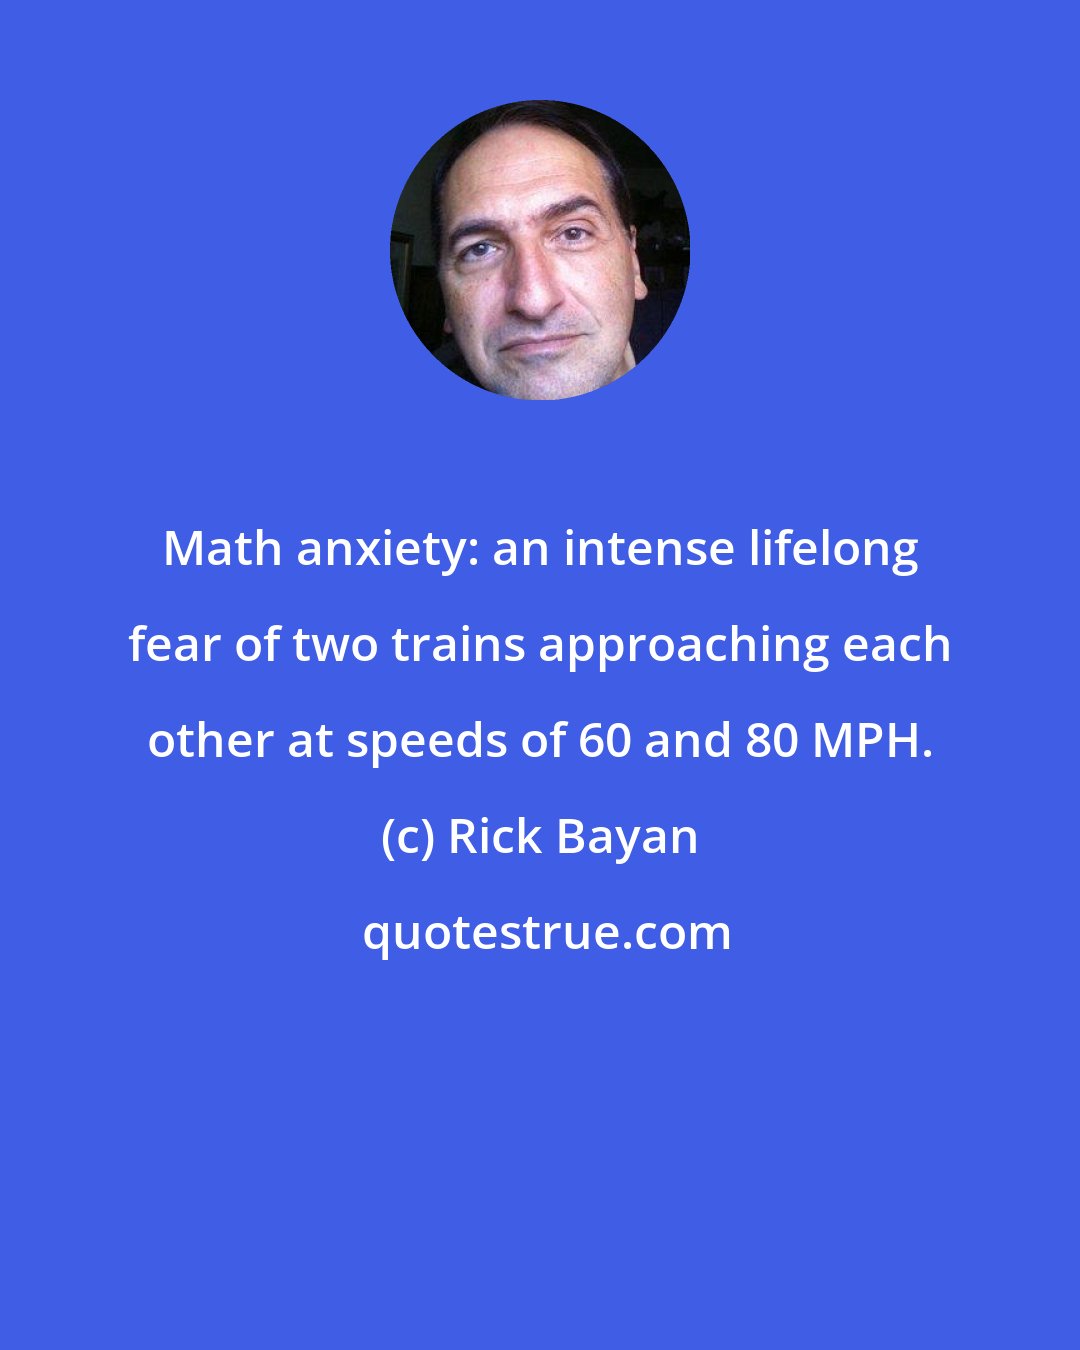 Rick Bayan: Math anxiety: an intense lifelong fear of two trains approaching each other at speeds of 60 and 80 MPH.